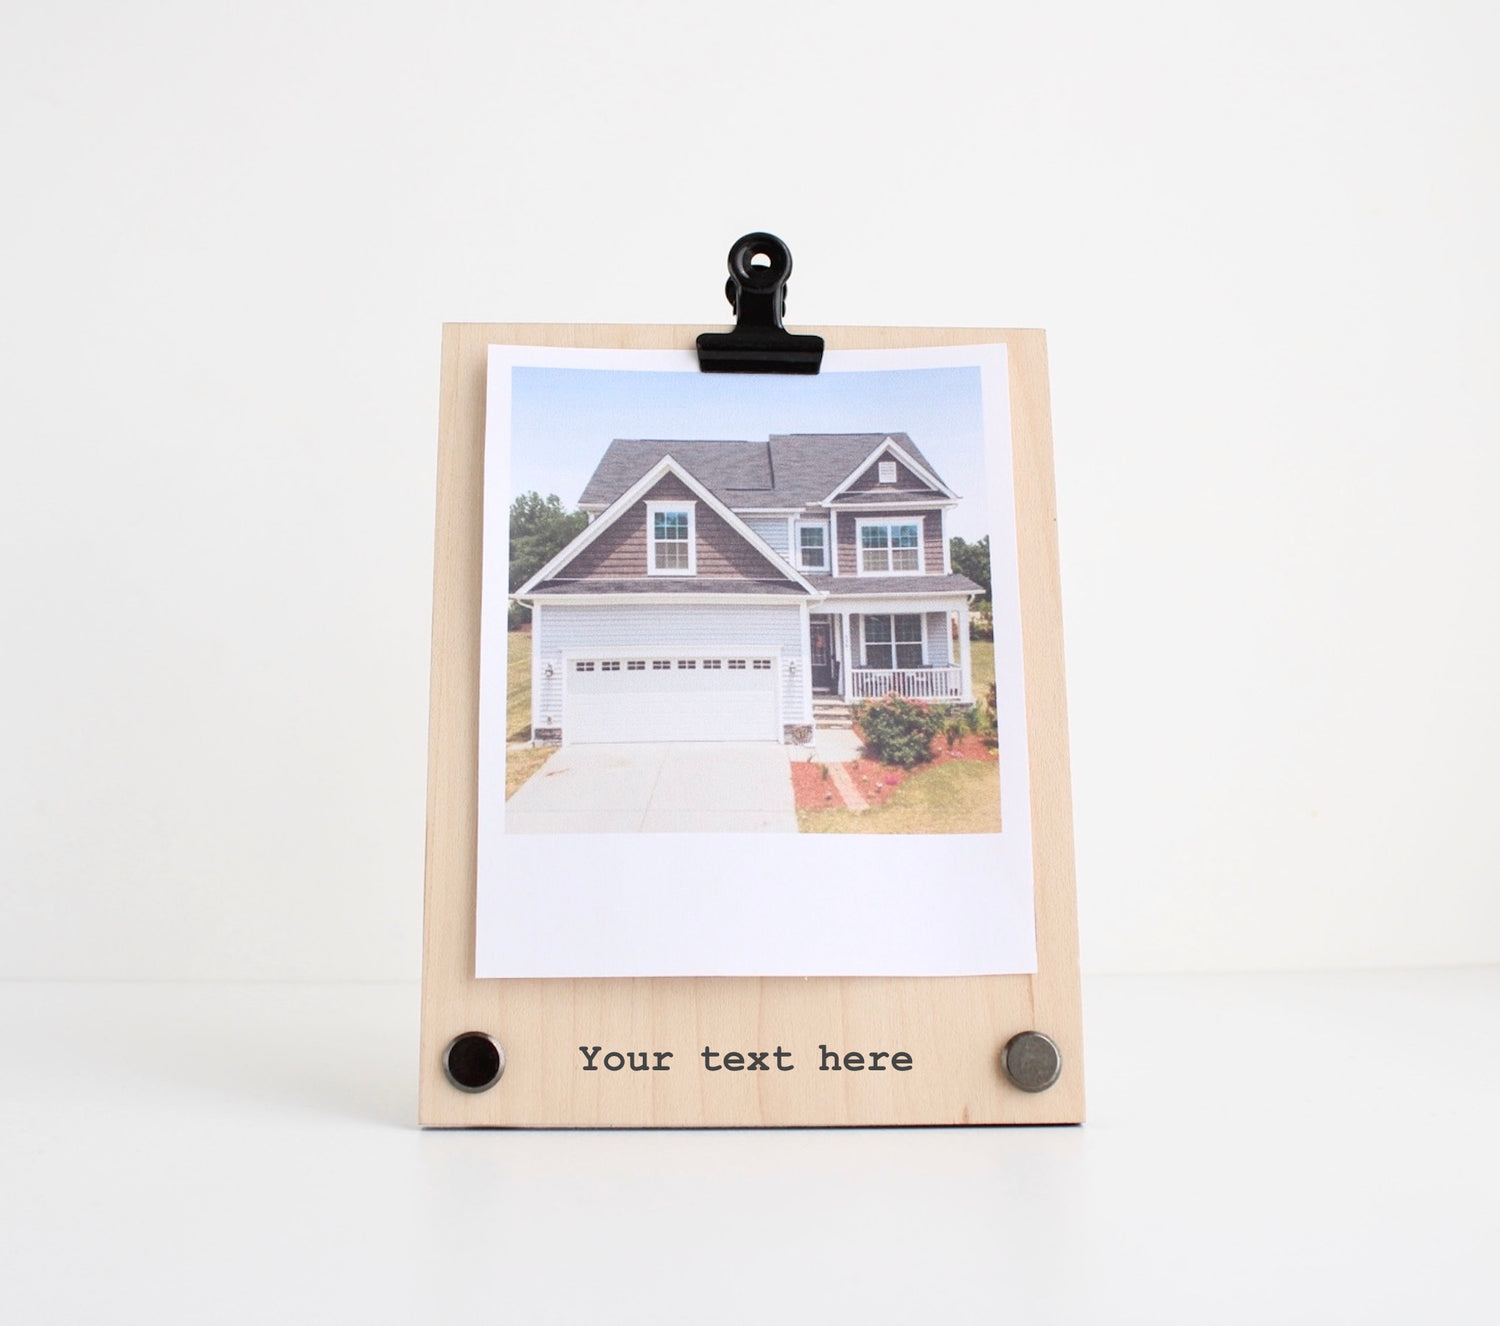 Single layer maple veneer frame with black clip at the top holding photograph